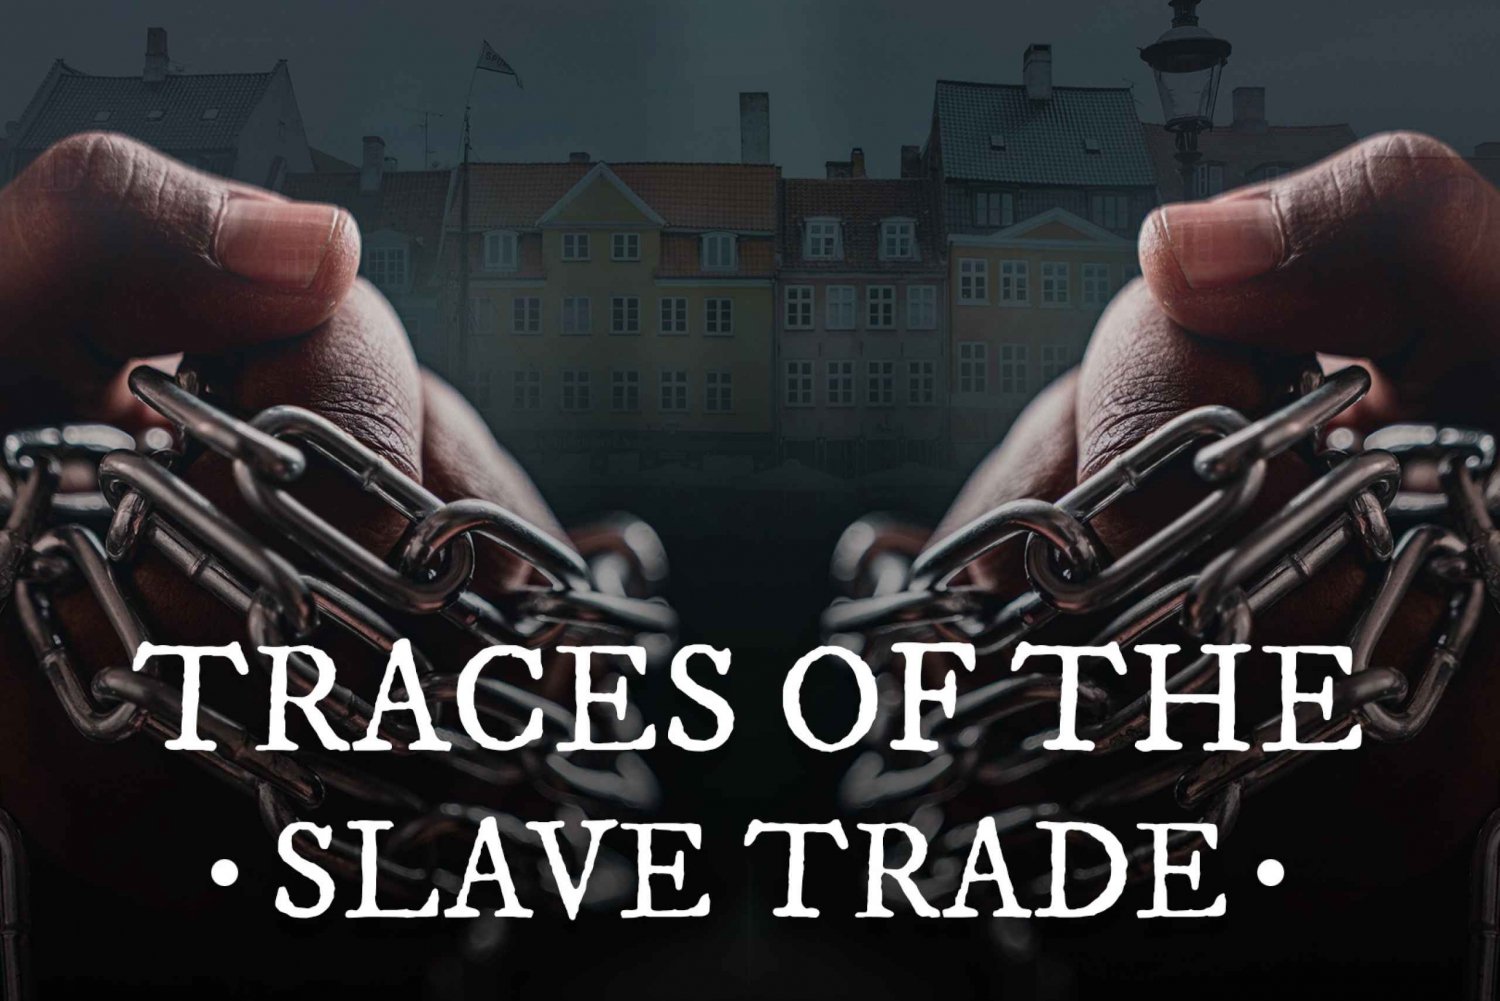 Traces of the Slave Trade